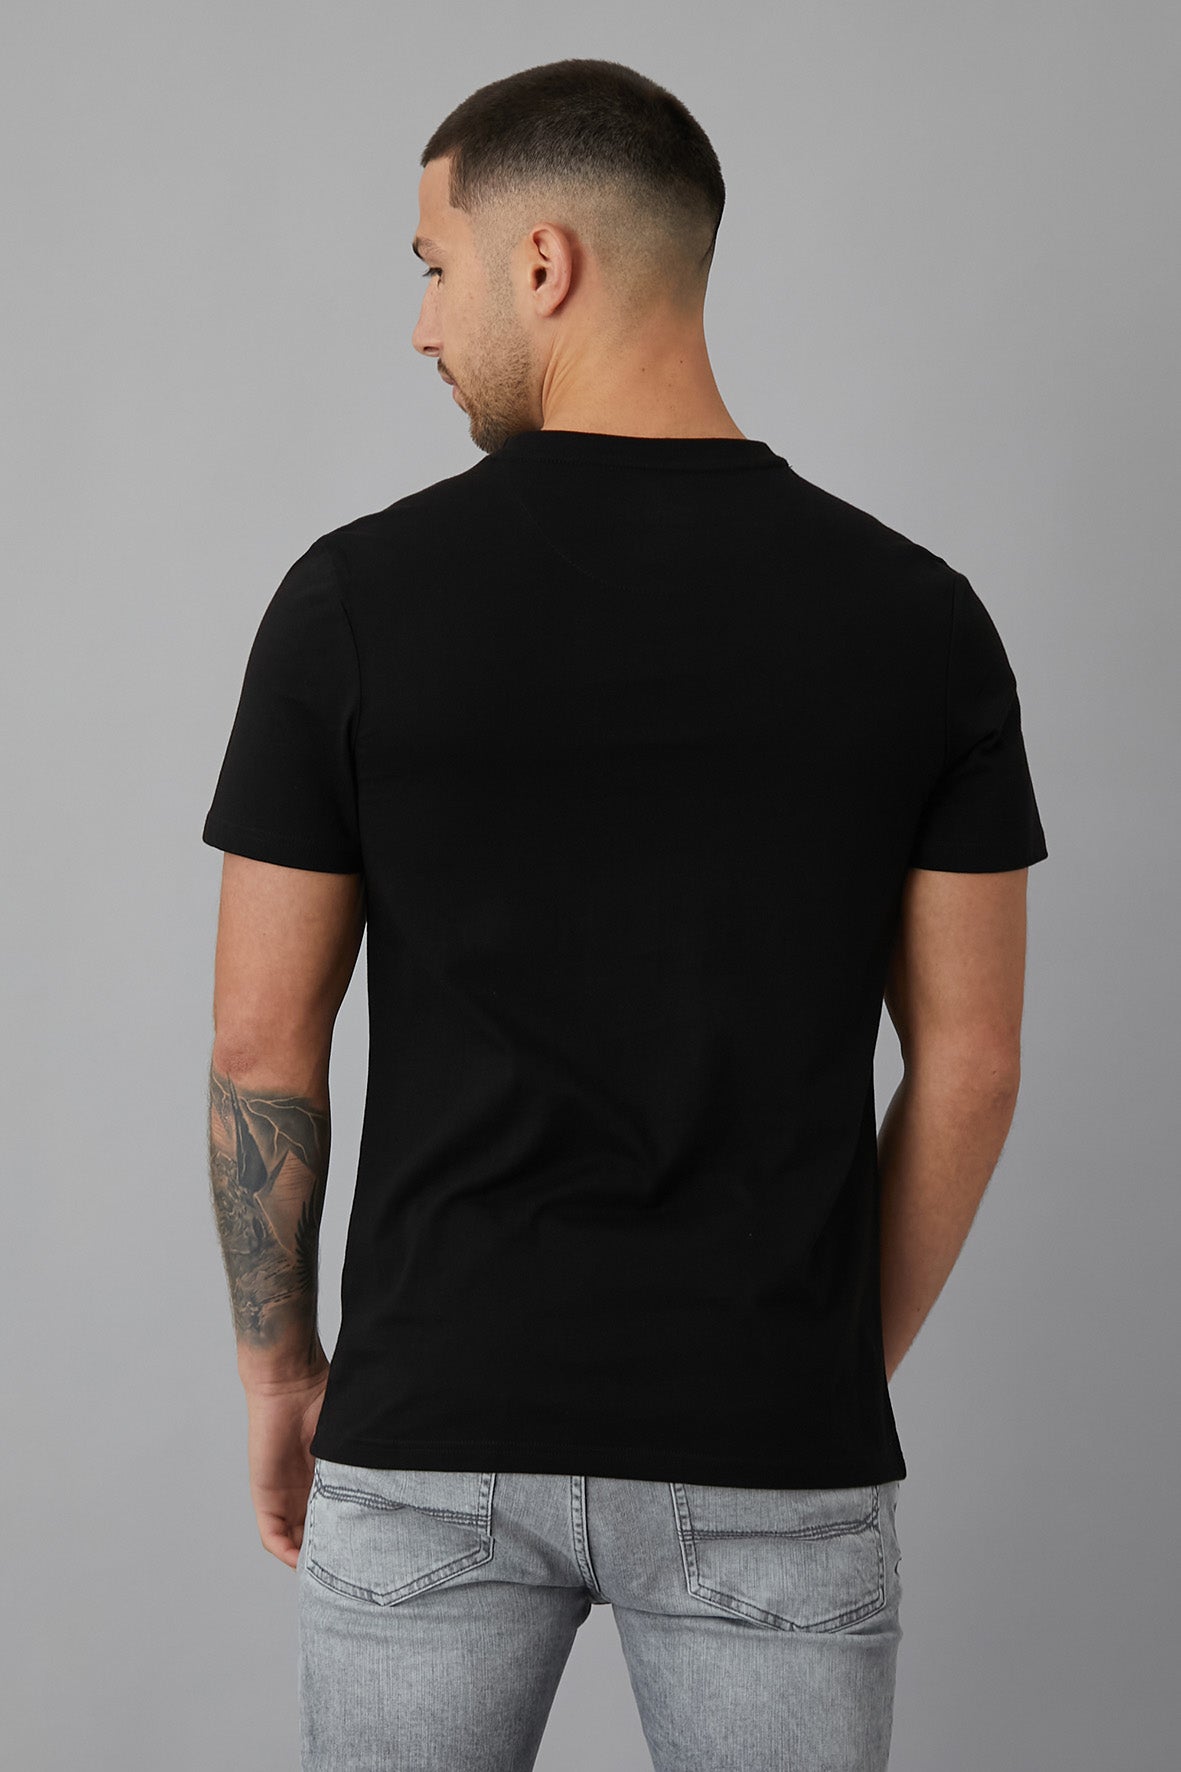 SPACE Printed crew neck t-shirt in BLACK - DML Jeans 